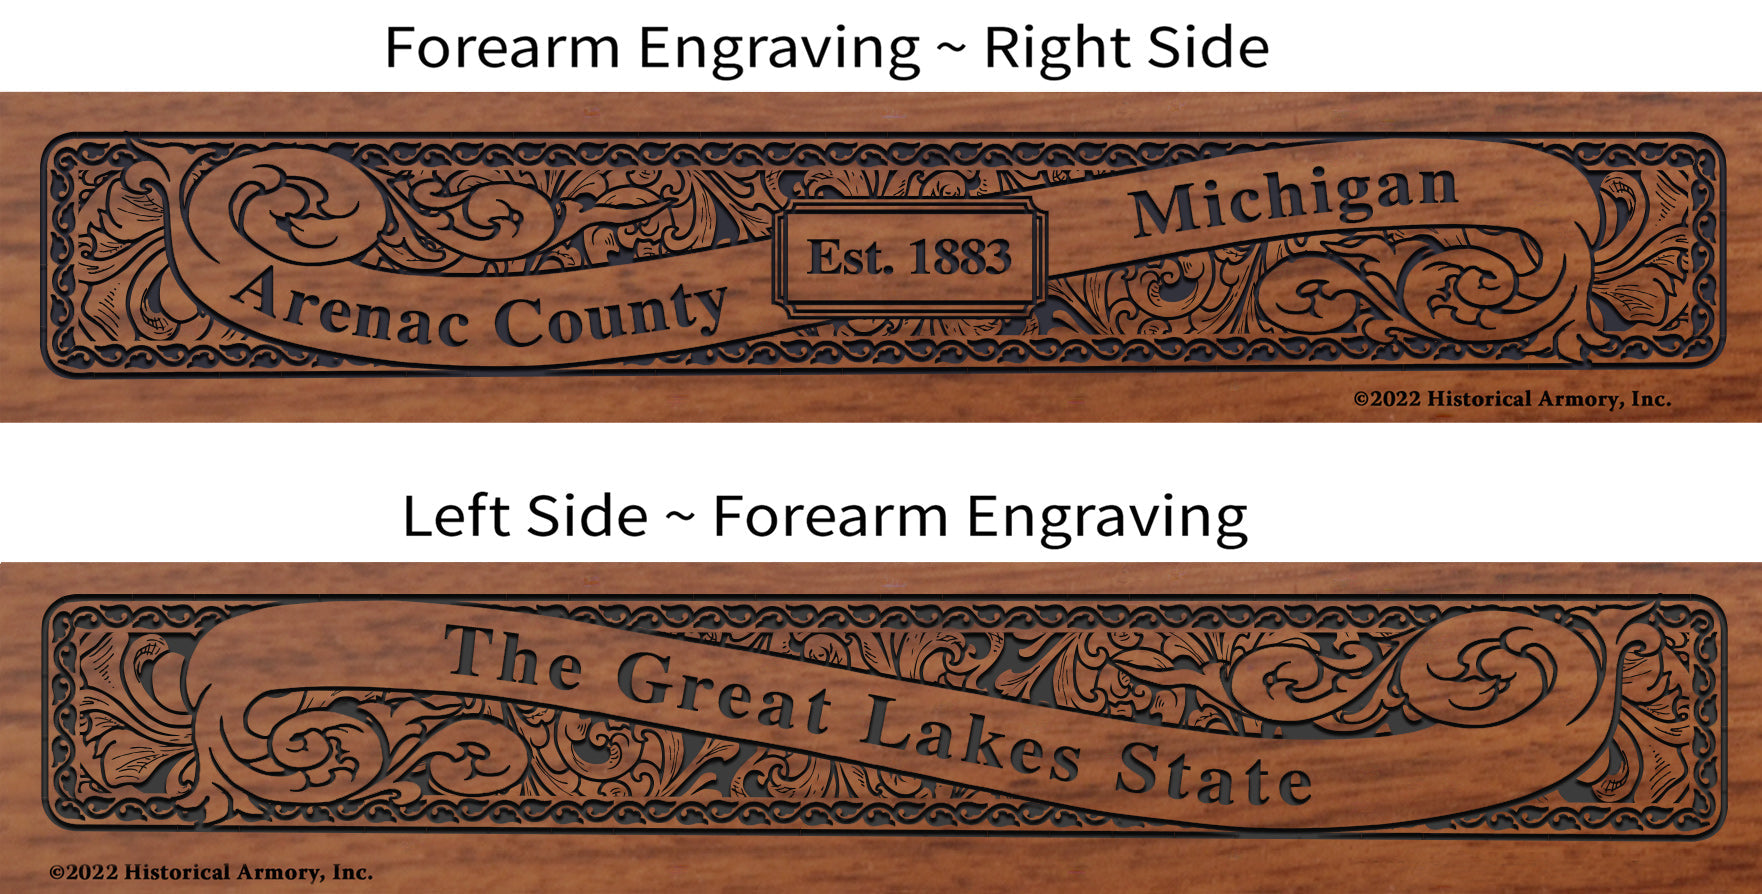 Arenac County Michigan Engraved Rifle Forearm